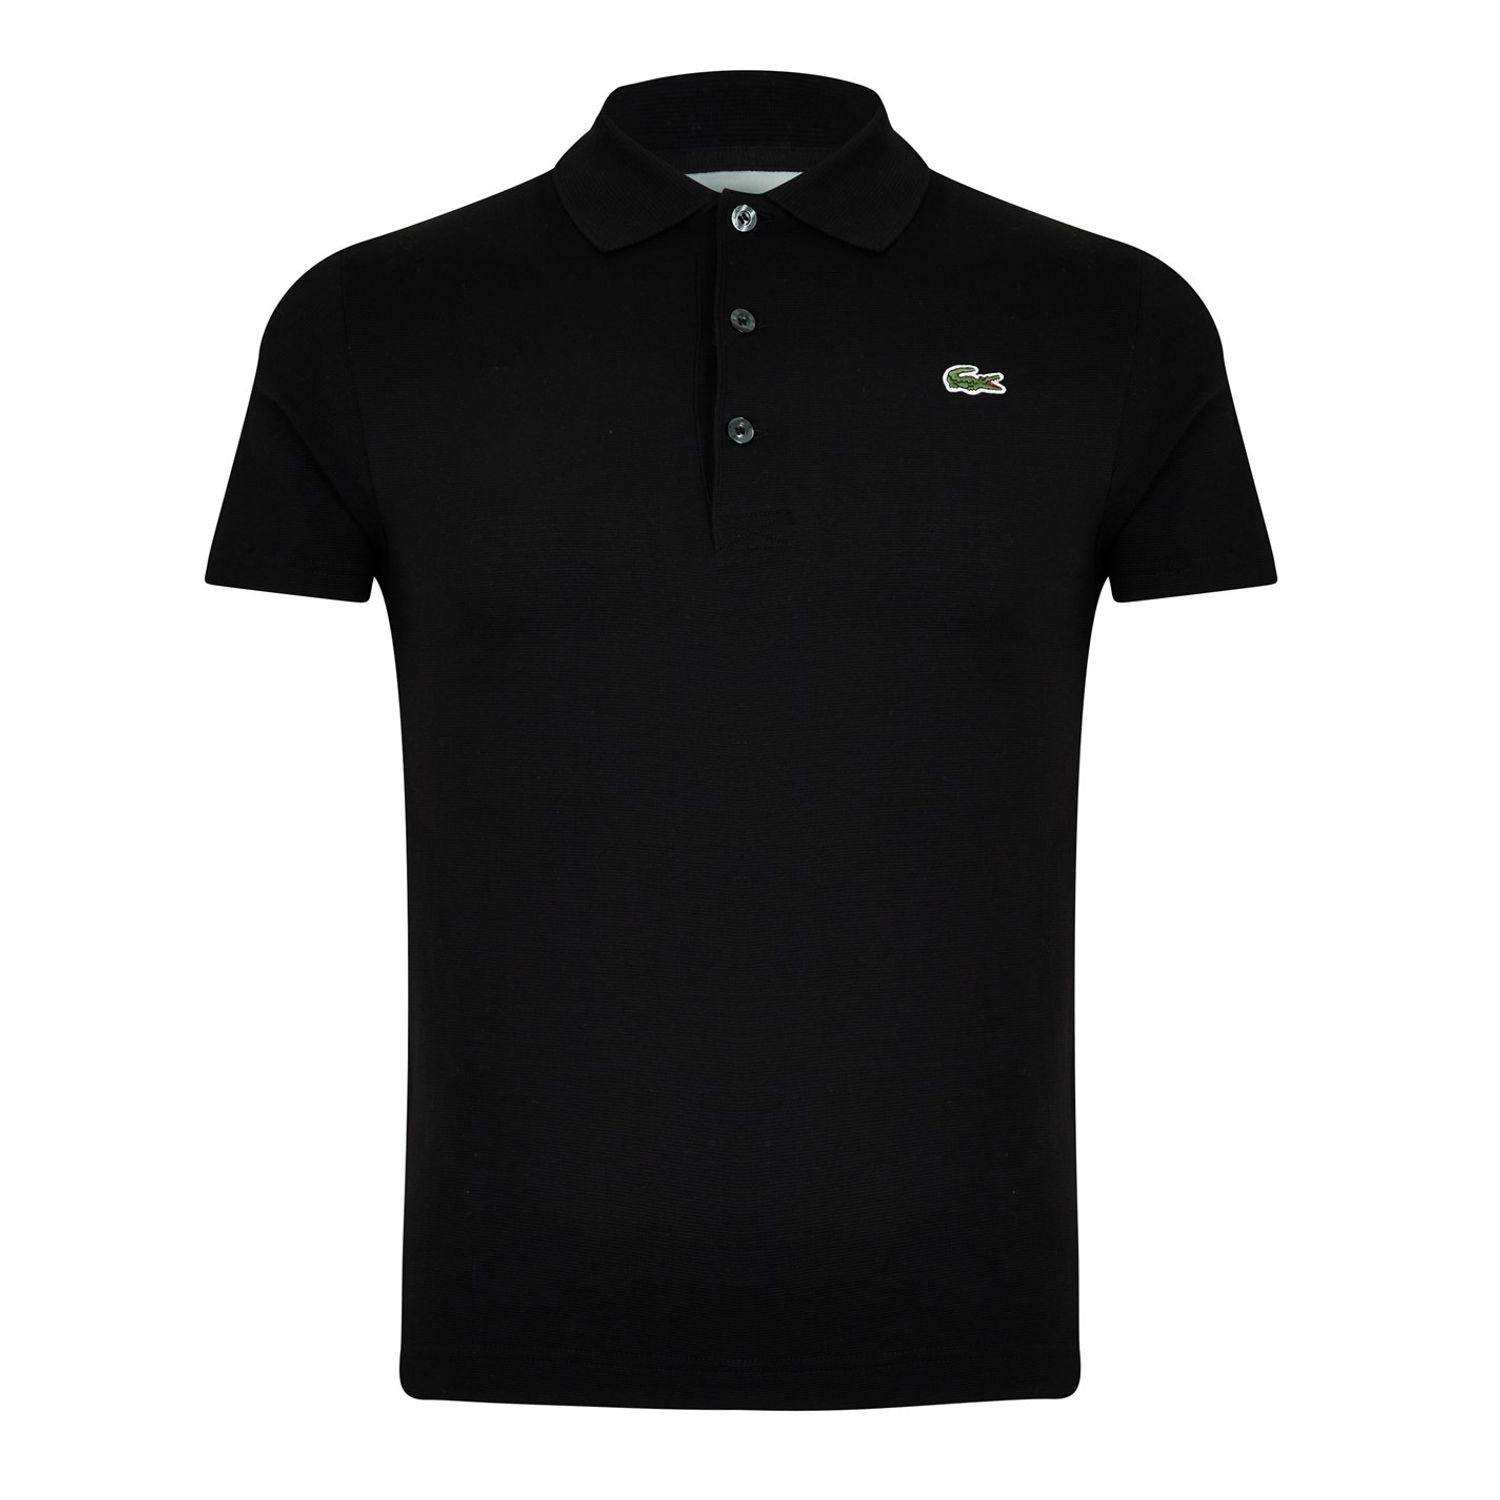 Black Lacoste Sport Polo - Get The Label